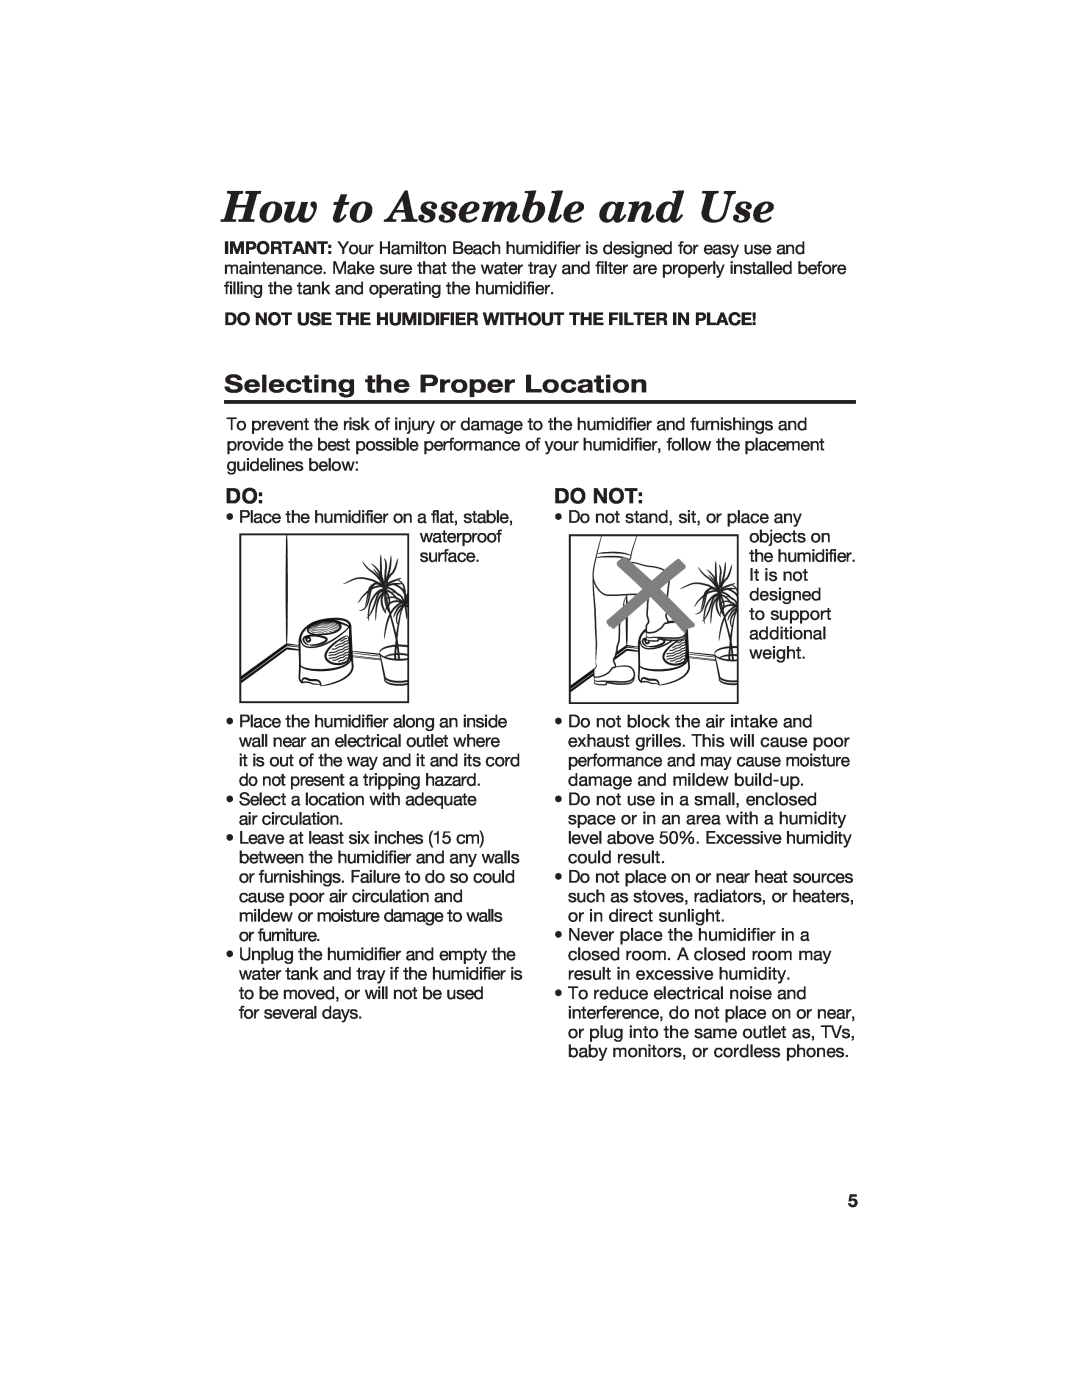 Hamilton Beach 840074800 manual How to Assemble and Use, Selecting the Proper Location, Do Not 